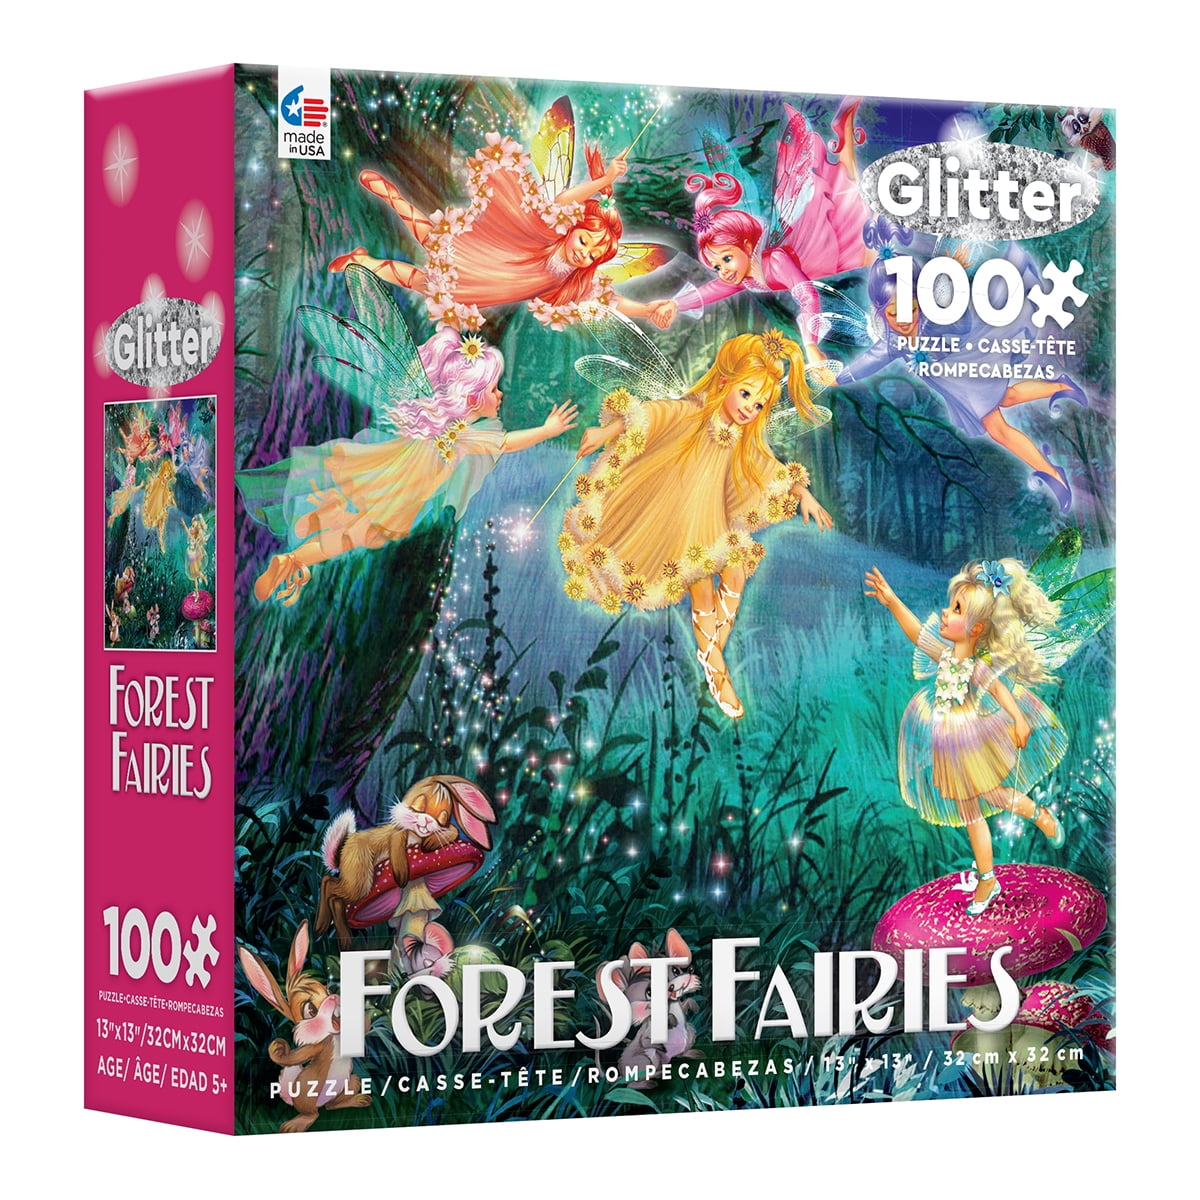 300 Pieces DIY Jigsaw Fairy Forest Princess Puzzle Game Educational Toys Gifts 